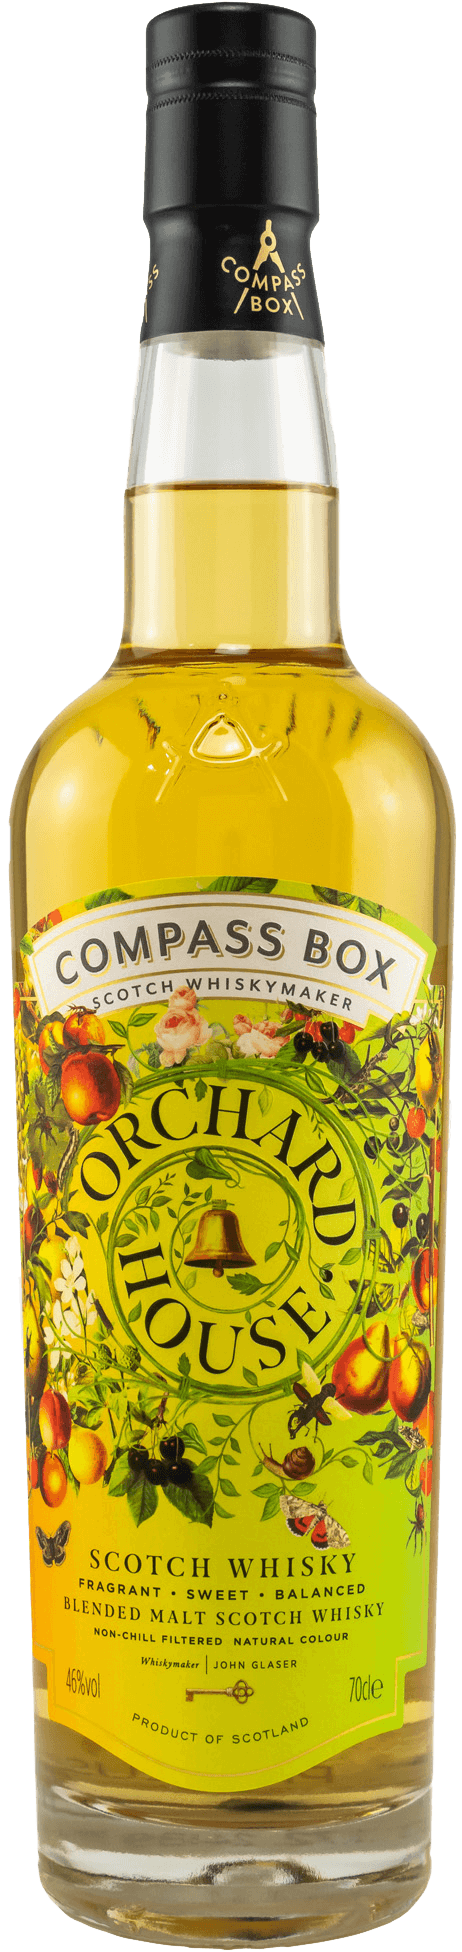 Compass Box Orchard House Whisky 46%